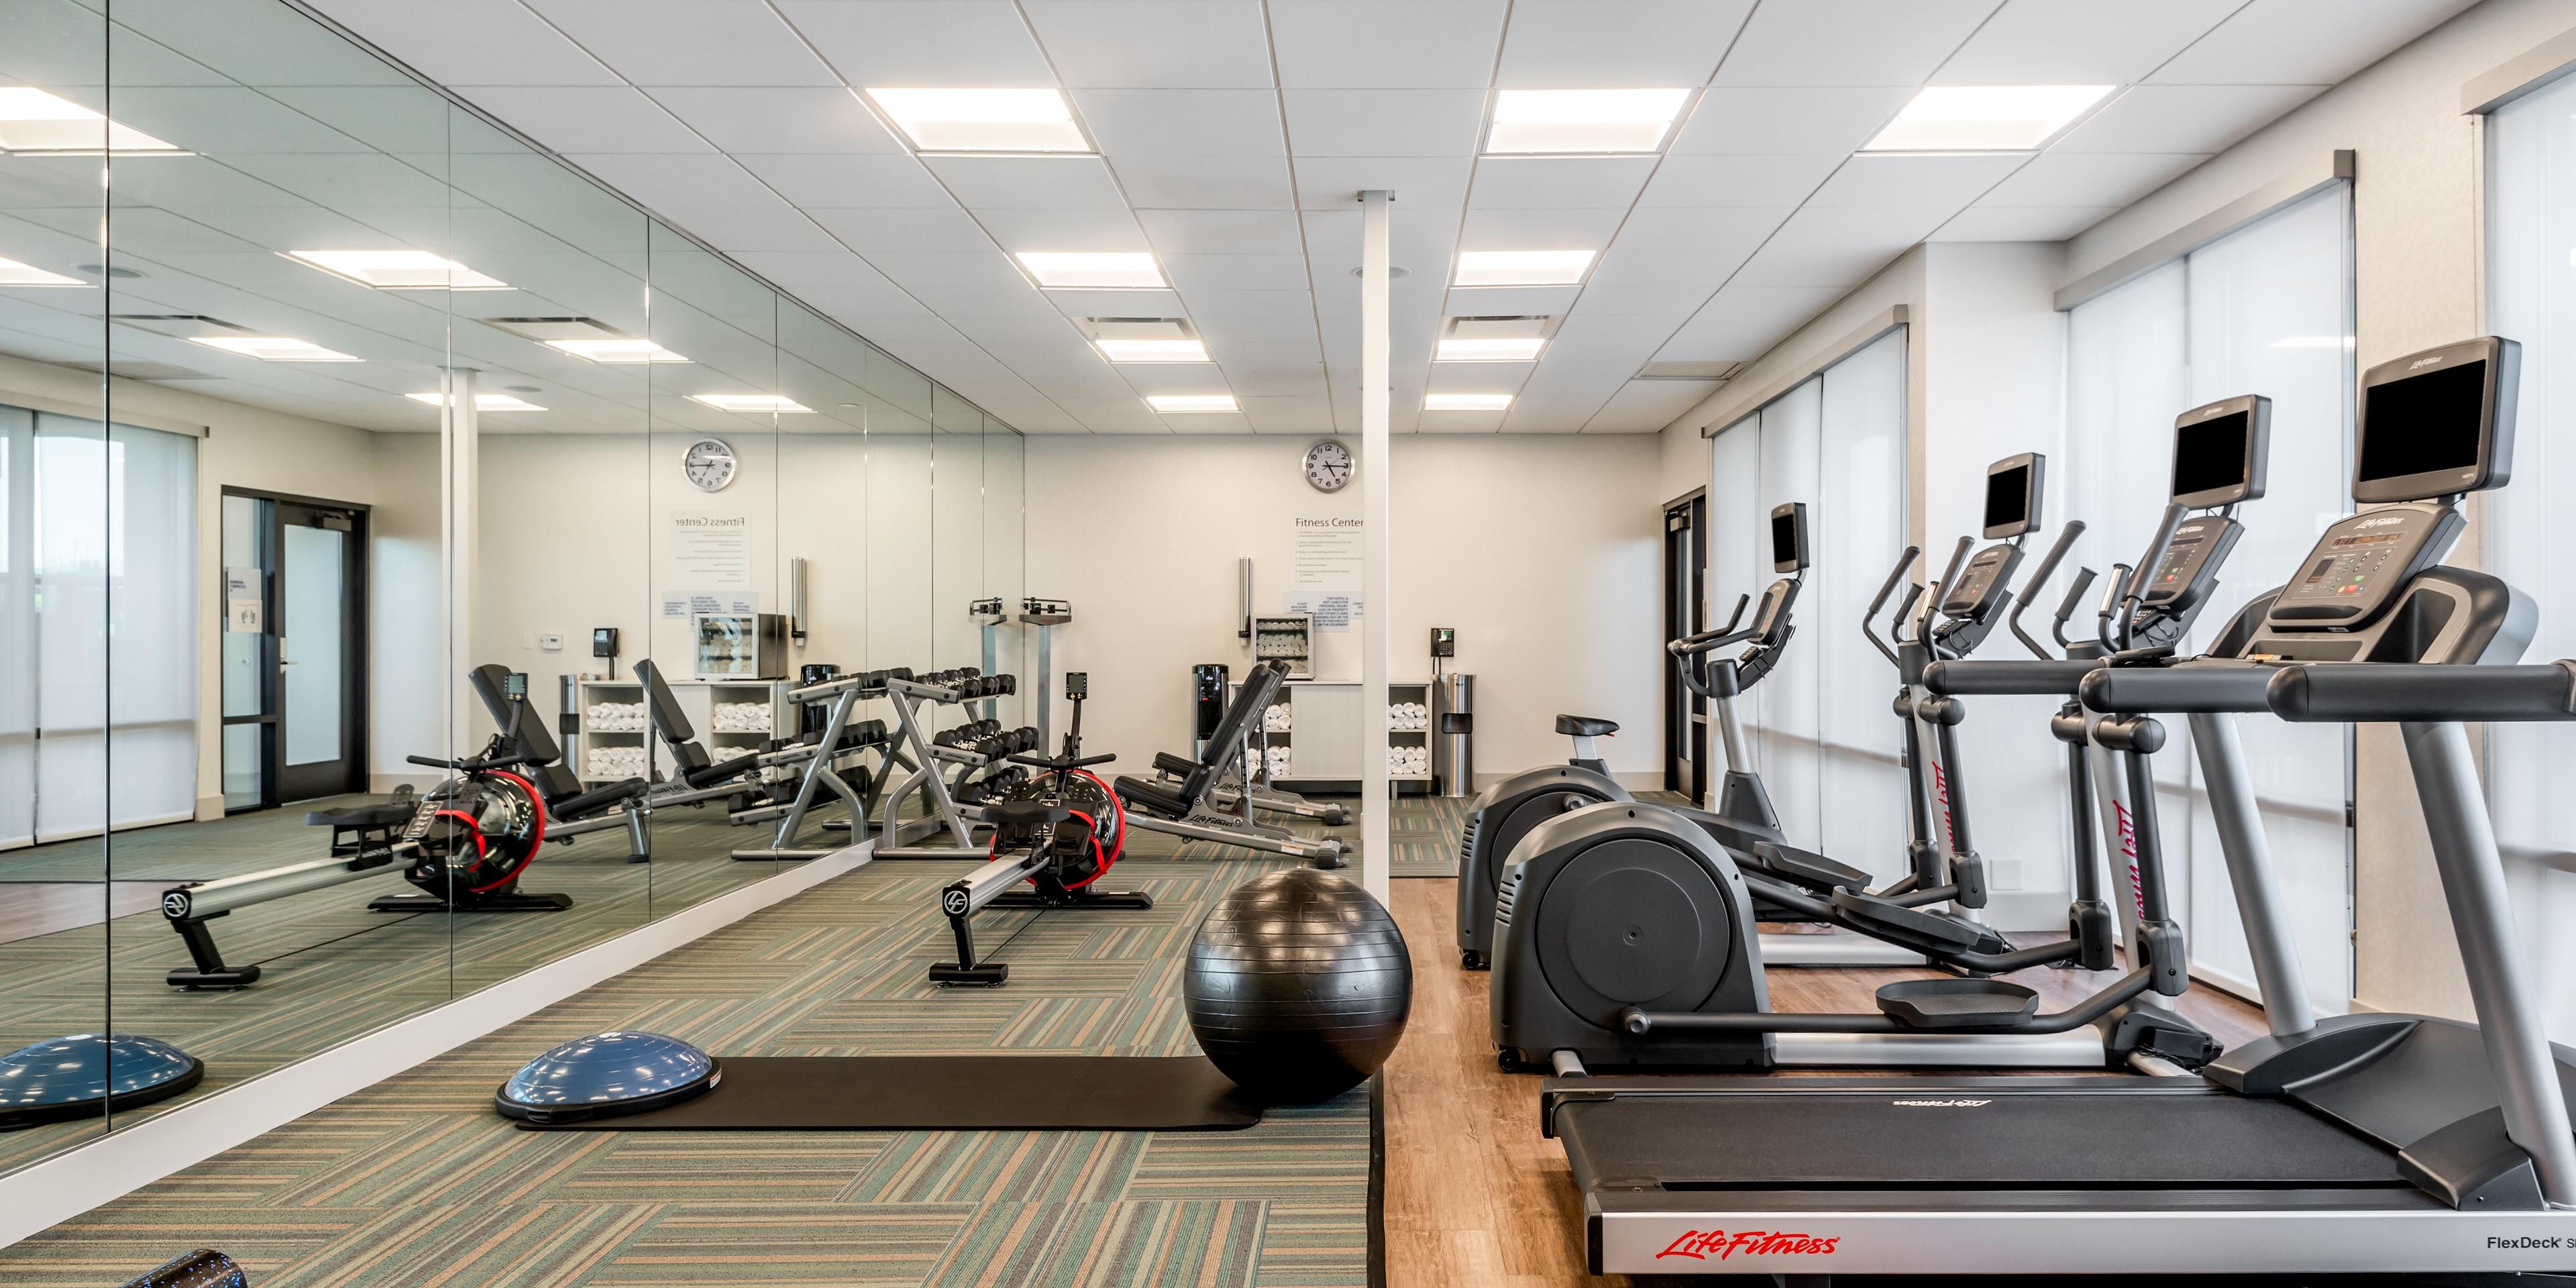 Stay healthy and fit at our on-site fitness center. Equipment includes elliptical machines, treadmills, free weights, and a rower. 